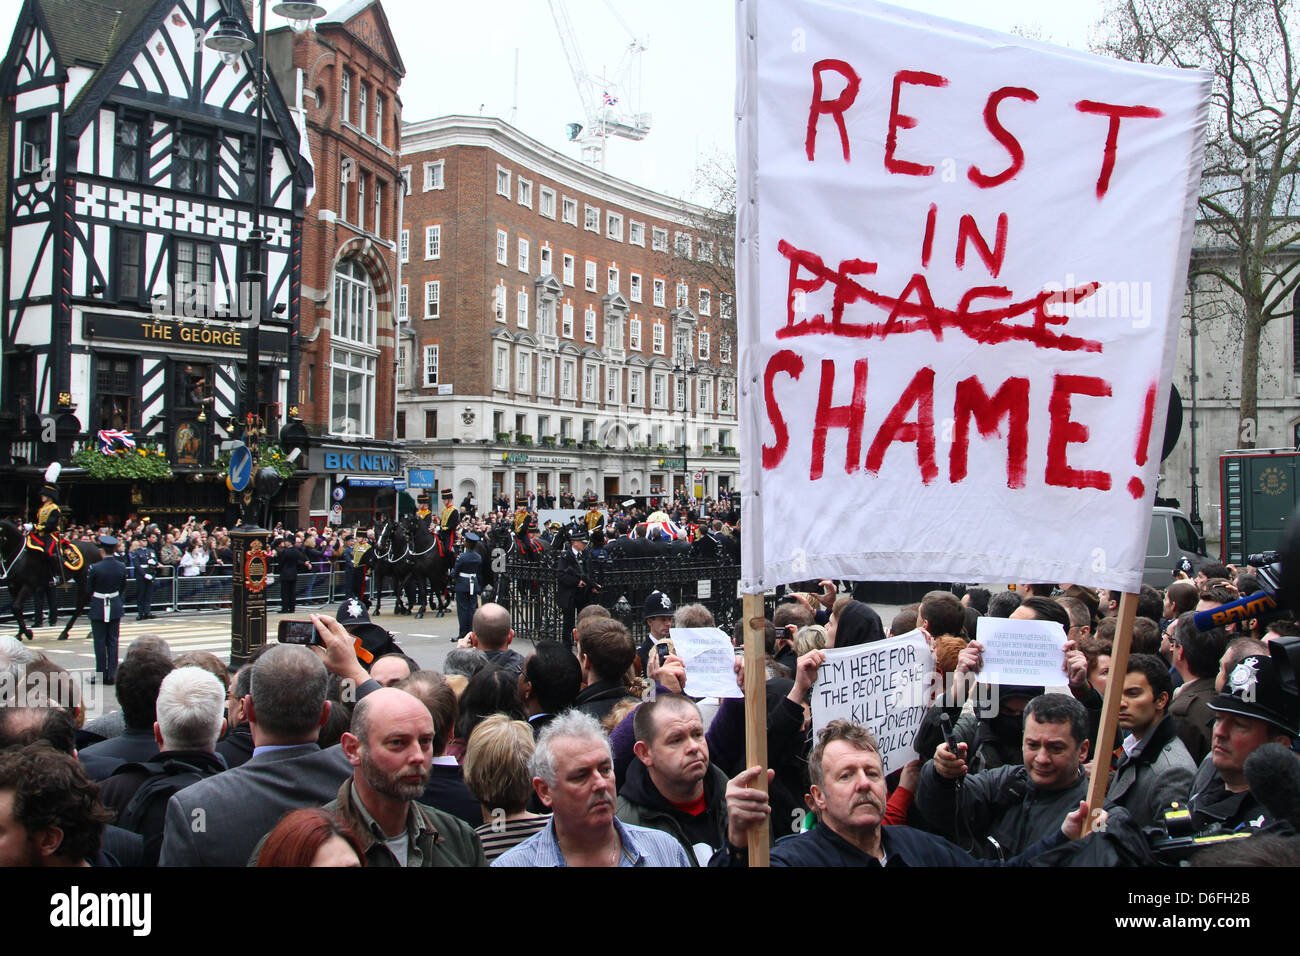 London, UK. 17th April 2013. The Funeral of Baroness Margaret Thatcher. An anti-Thatcher protester with a Rest in Shame placard outside the Royal Courts of Justice. The Funeral service takes place in St. Paul's Cathedral, London. Pic: Paul Marriott Photography/Alamy Live News Stock Photo